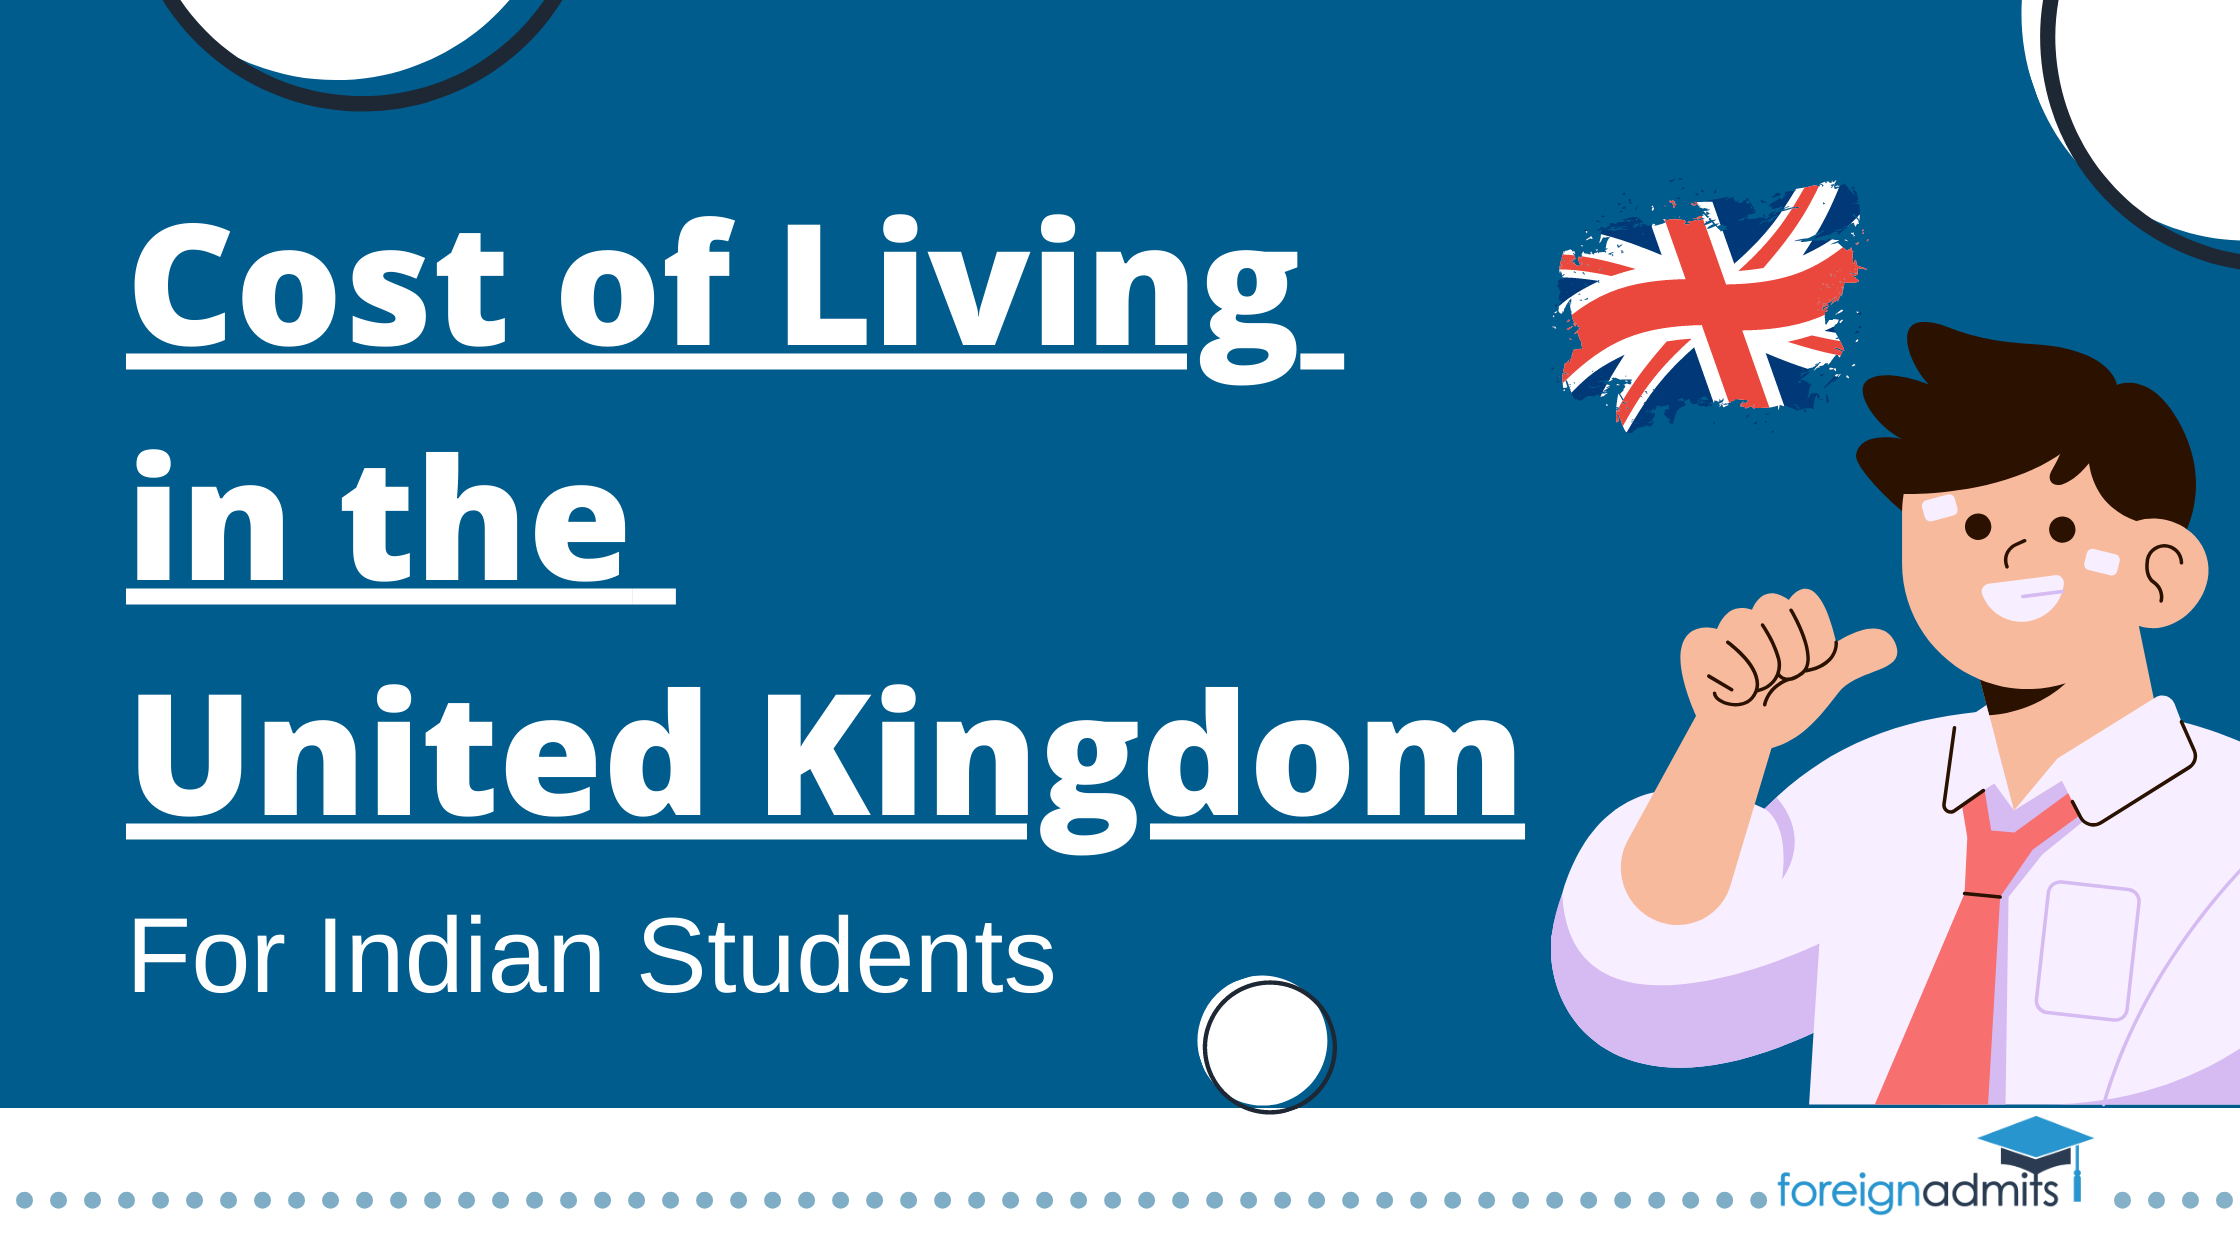 Cost of Living in the United Kingdom for Indian Students